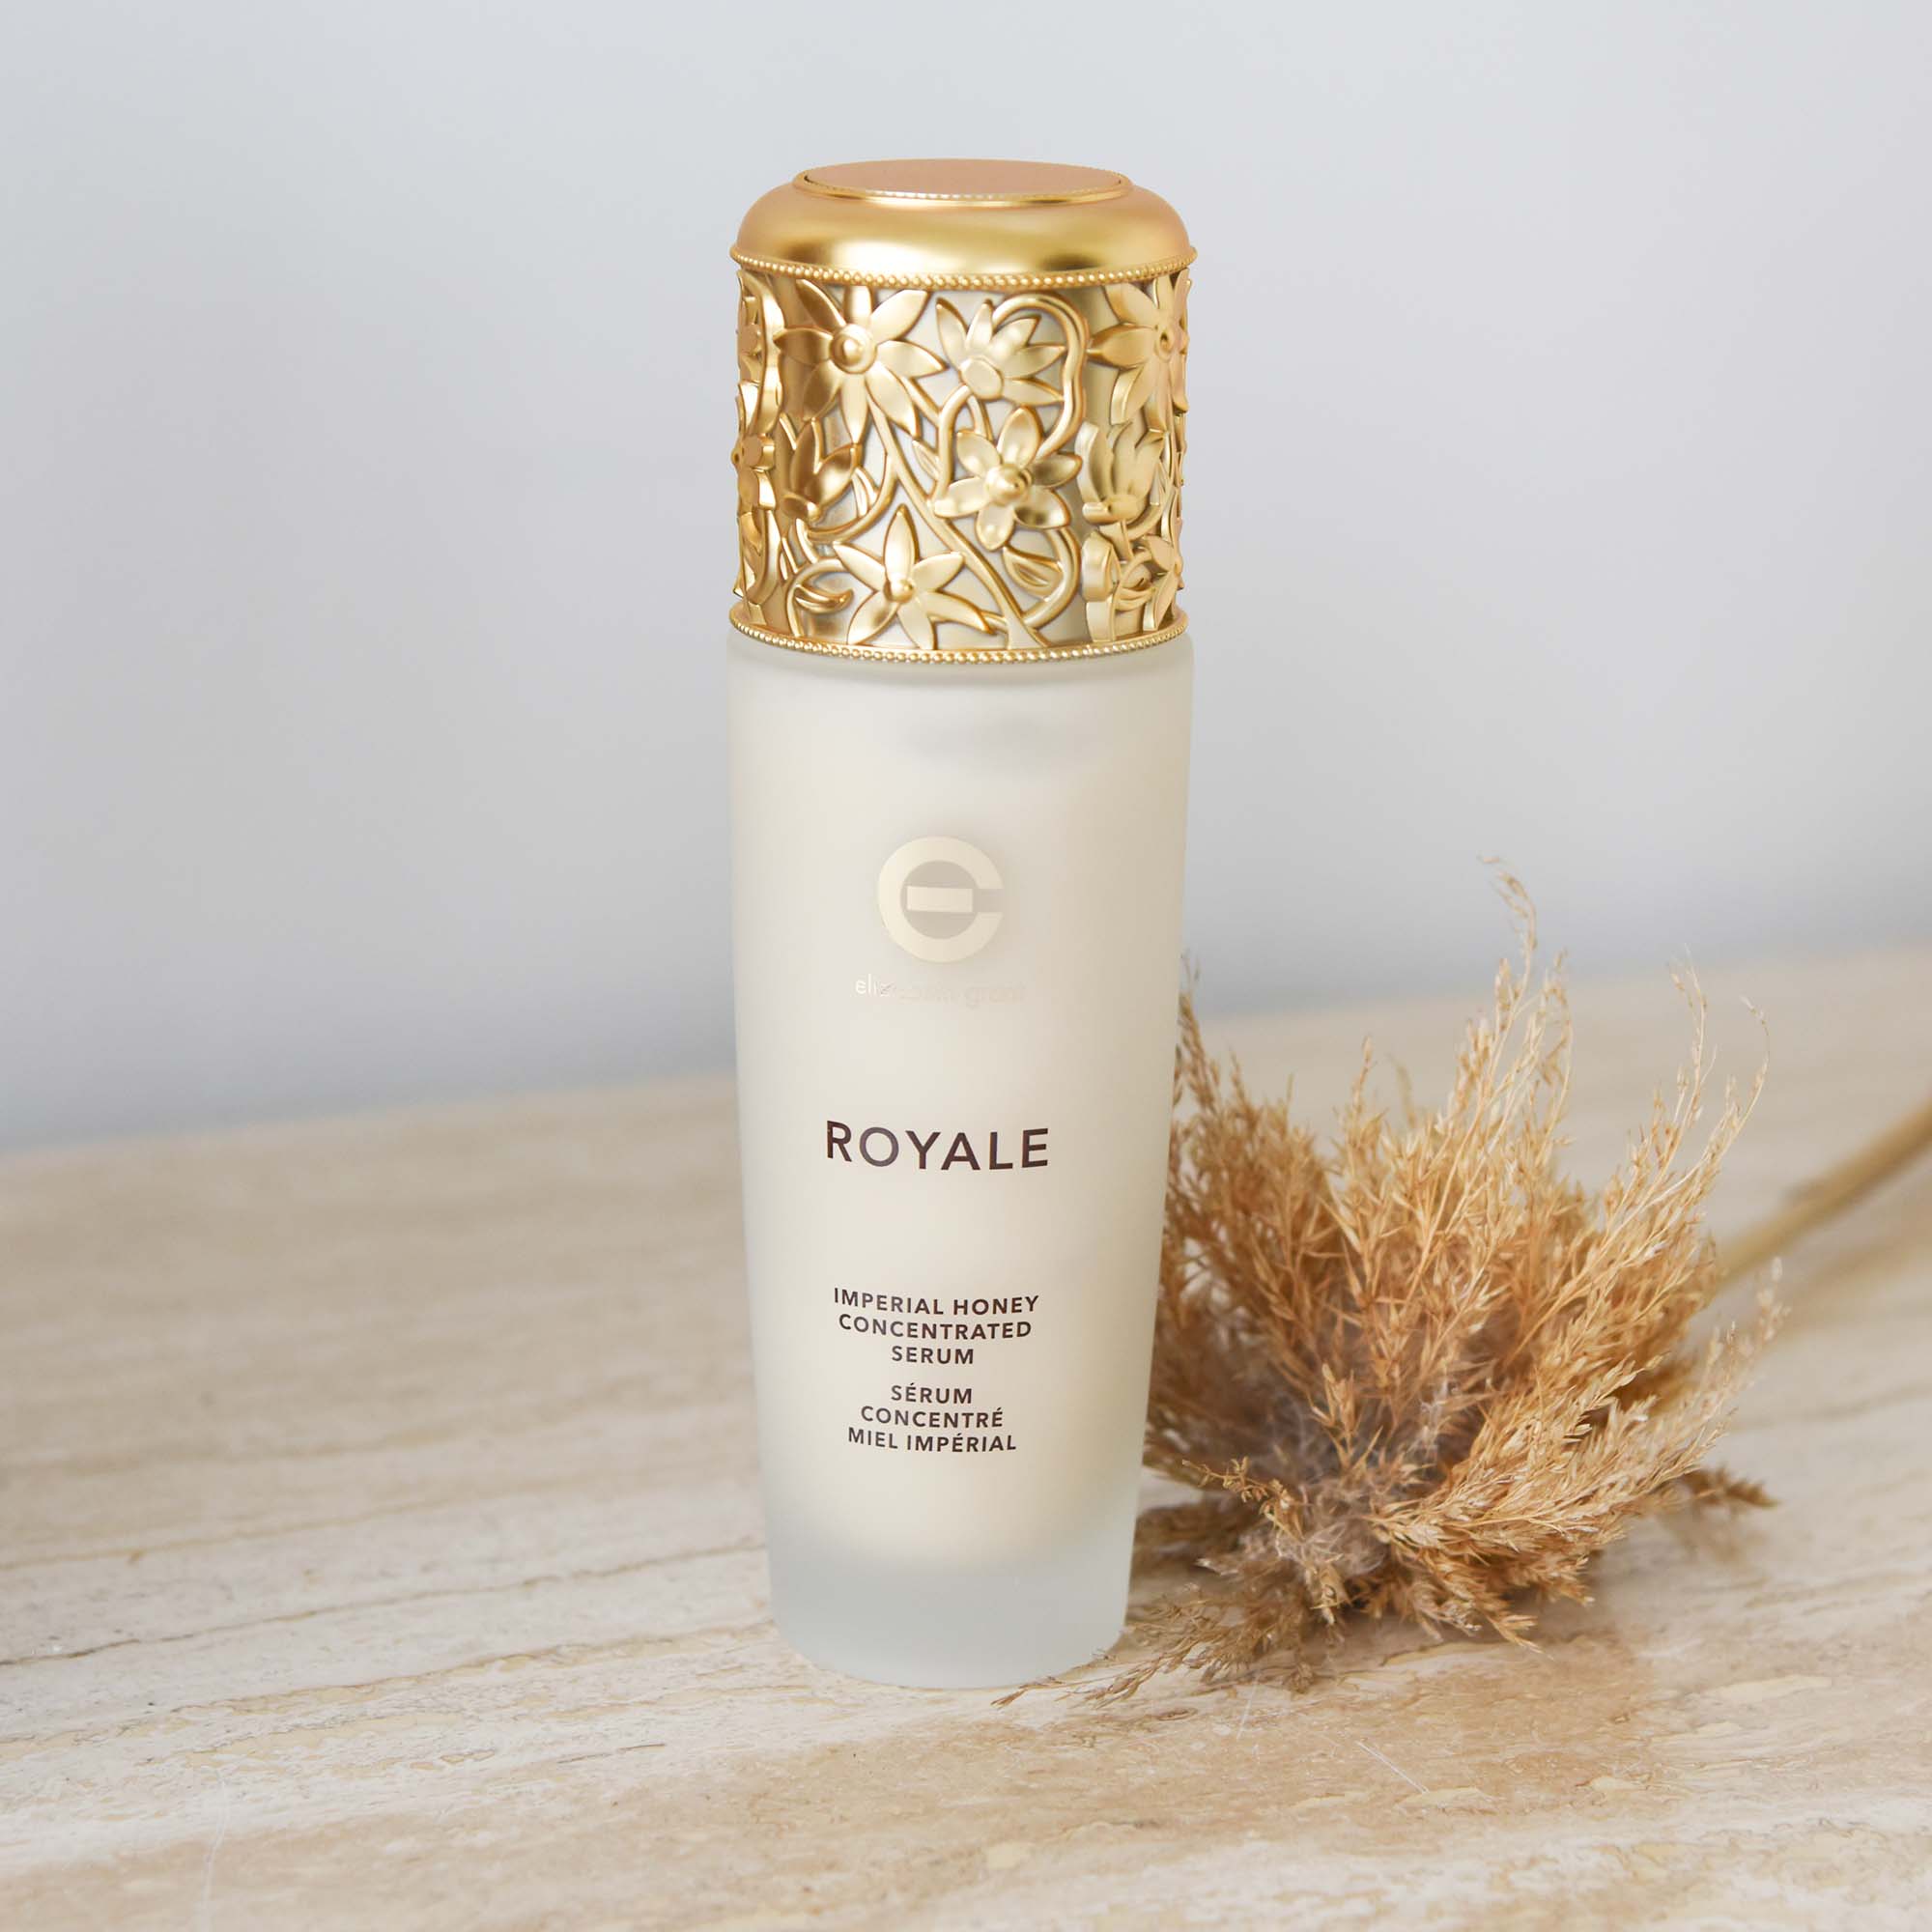 Elizabeth Grant Skin Care Royale Imperial Honey Concentrated Serum